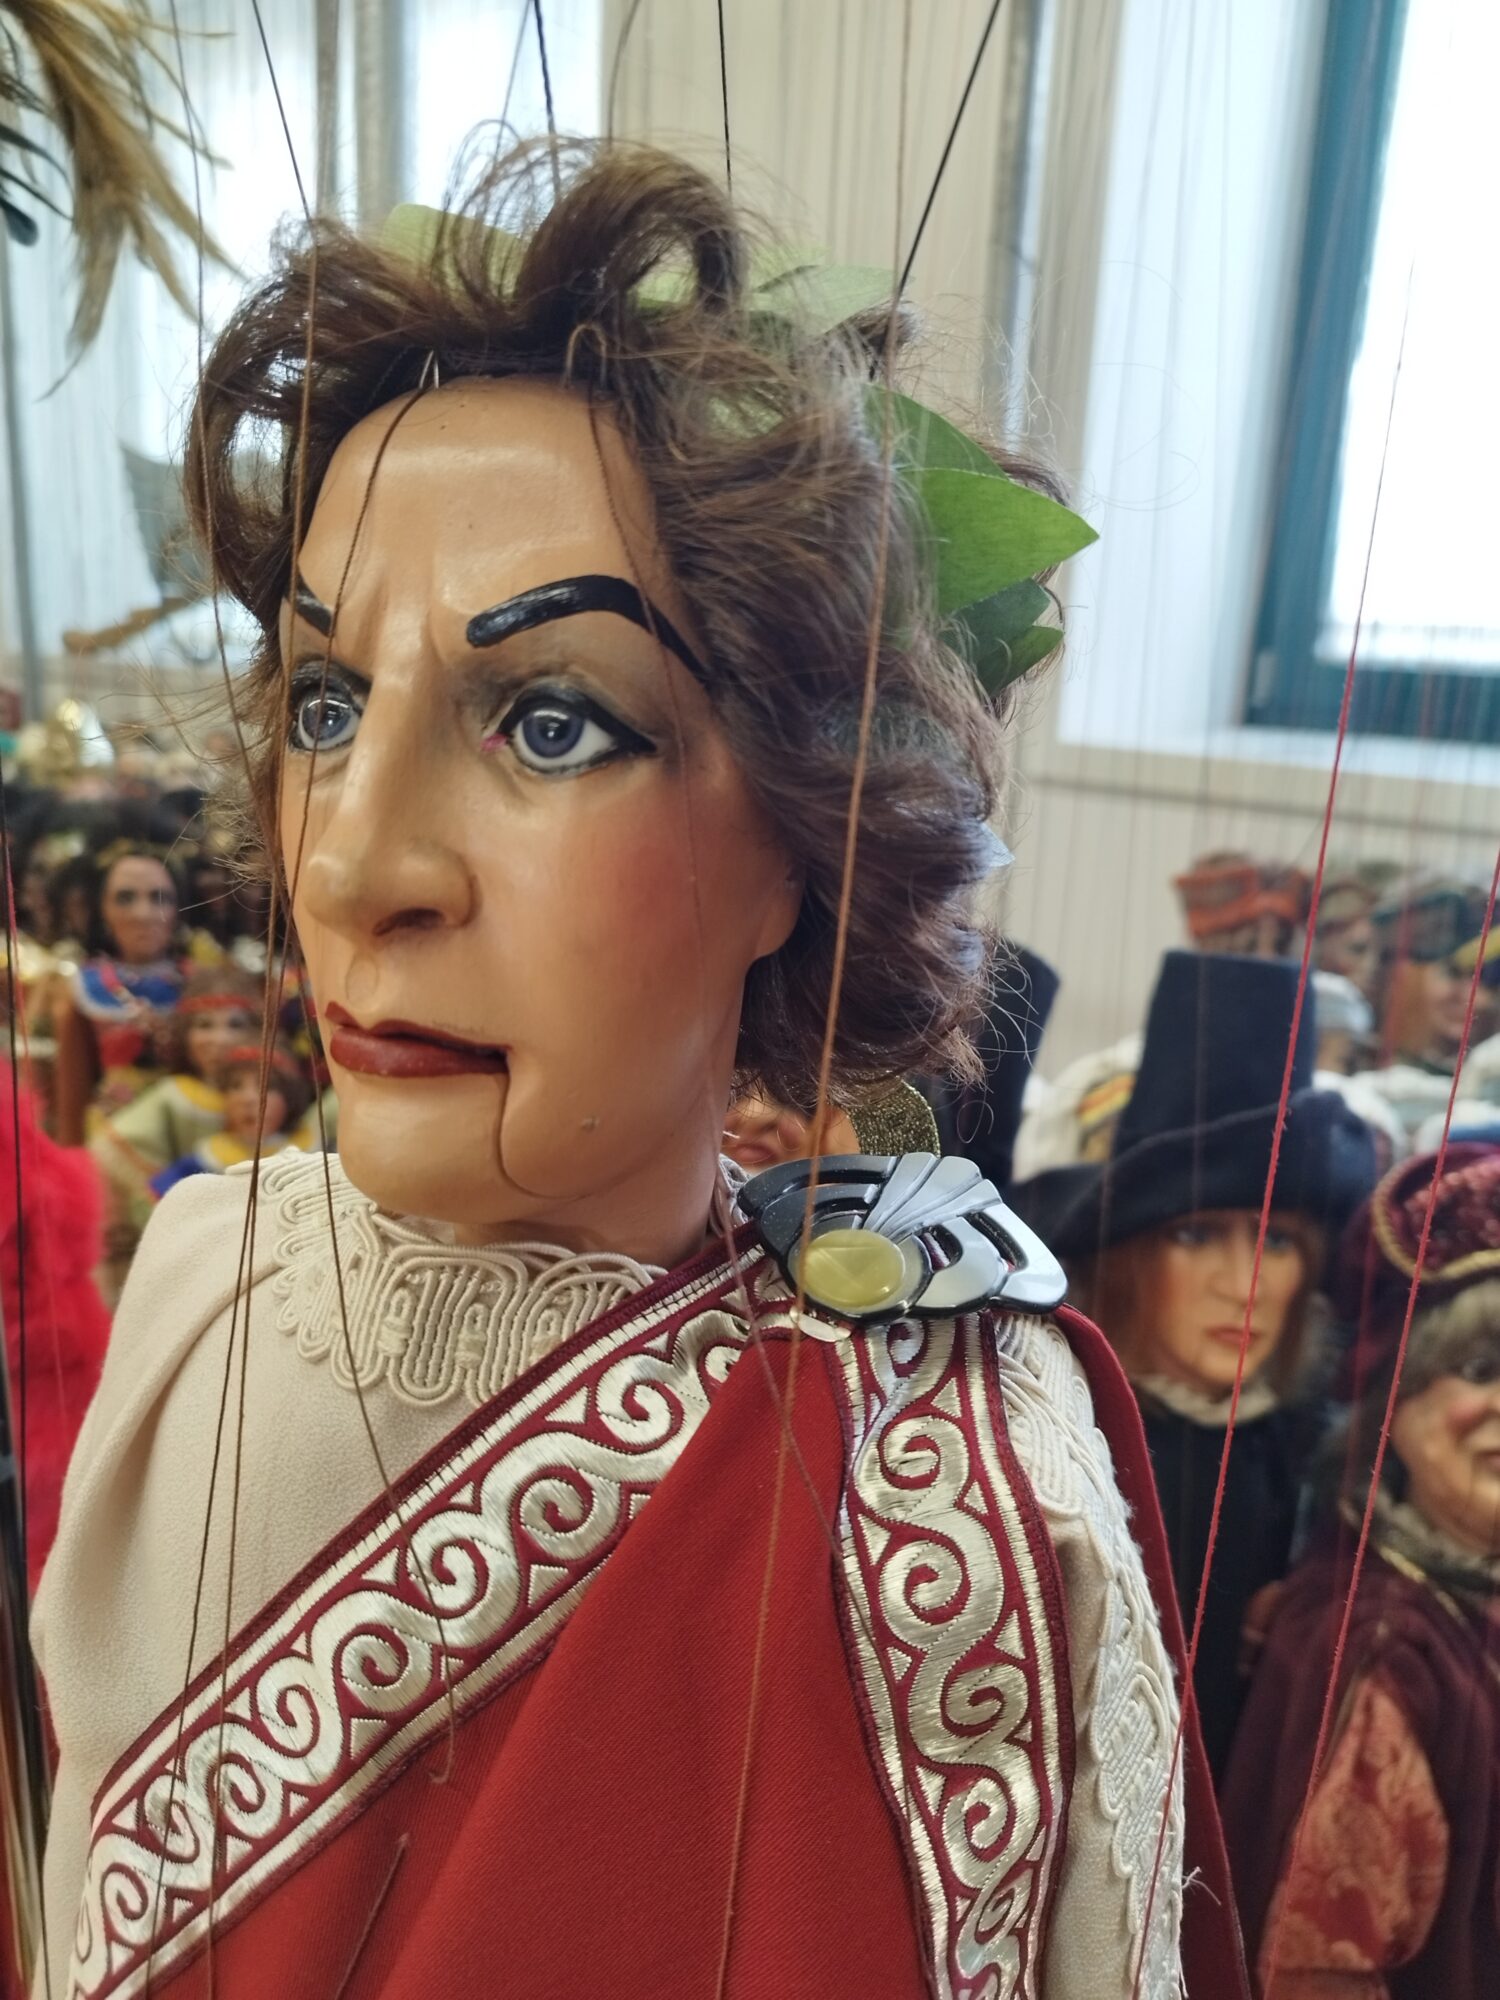 Marionette Orfeo